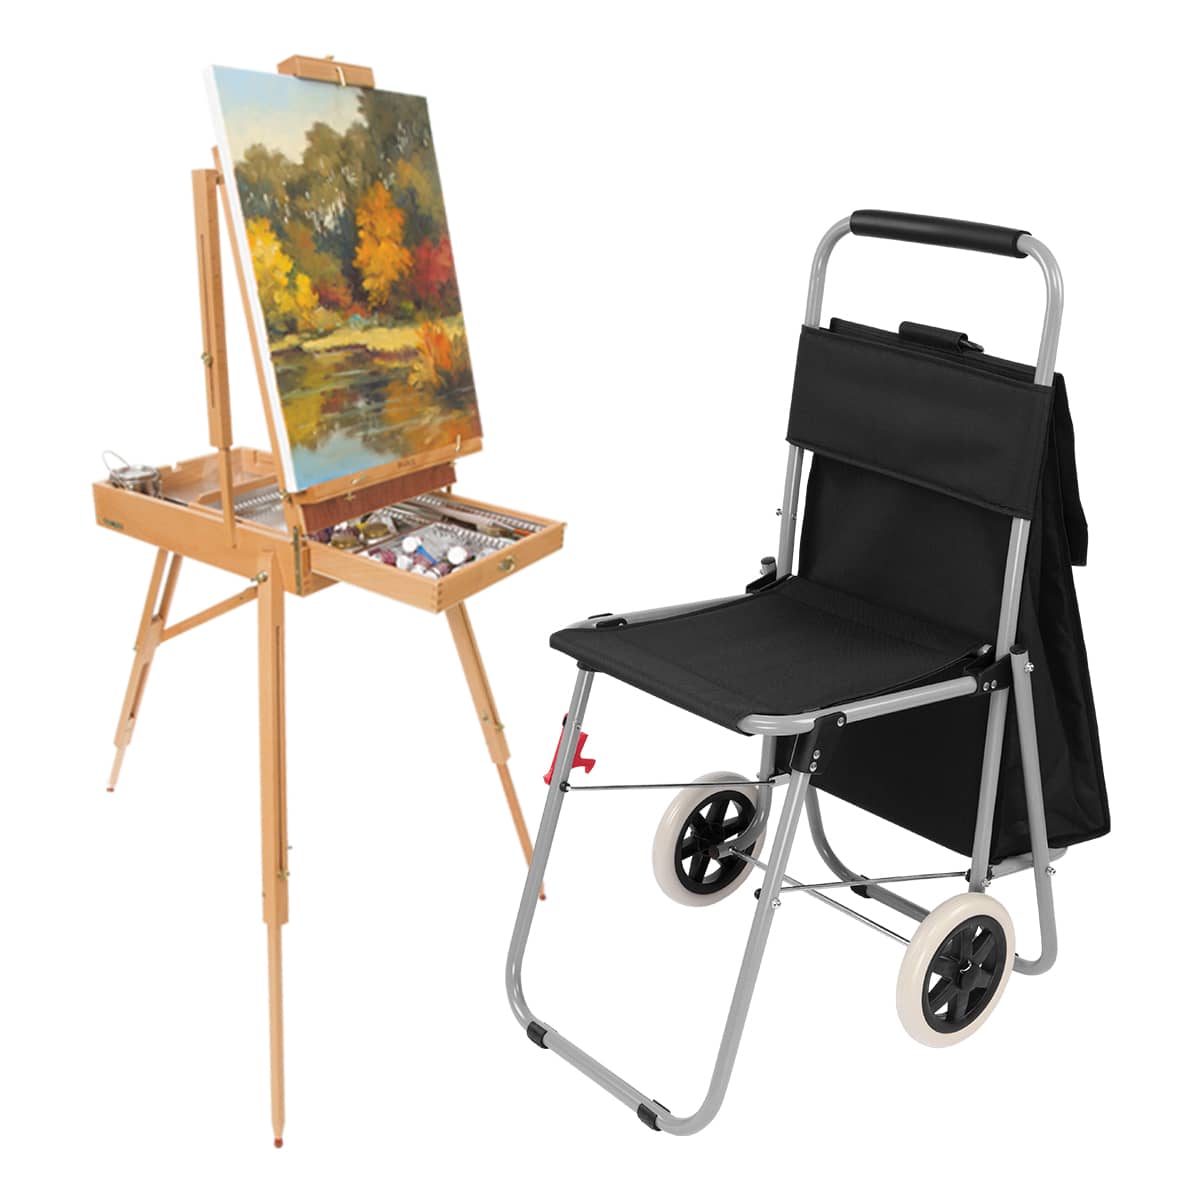 Artcomber Portable Chair Black & Paris Deluxe French Easel, Super Combo Set